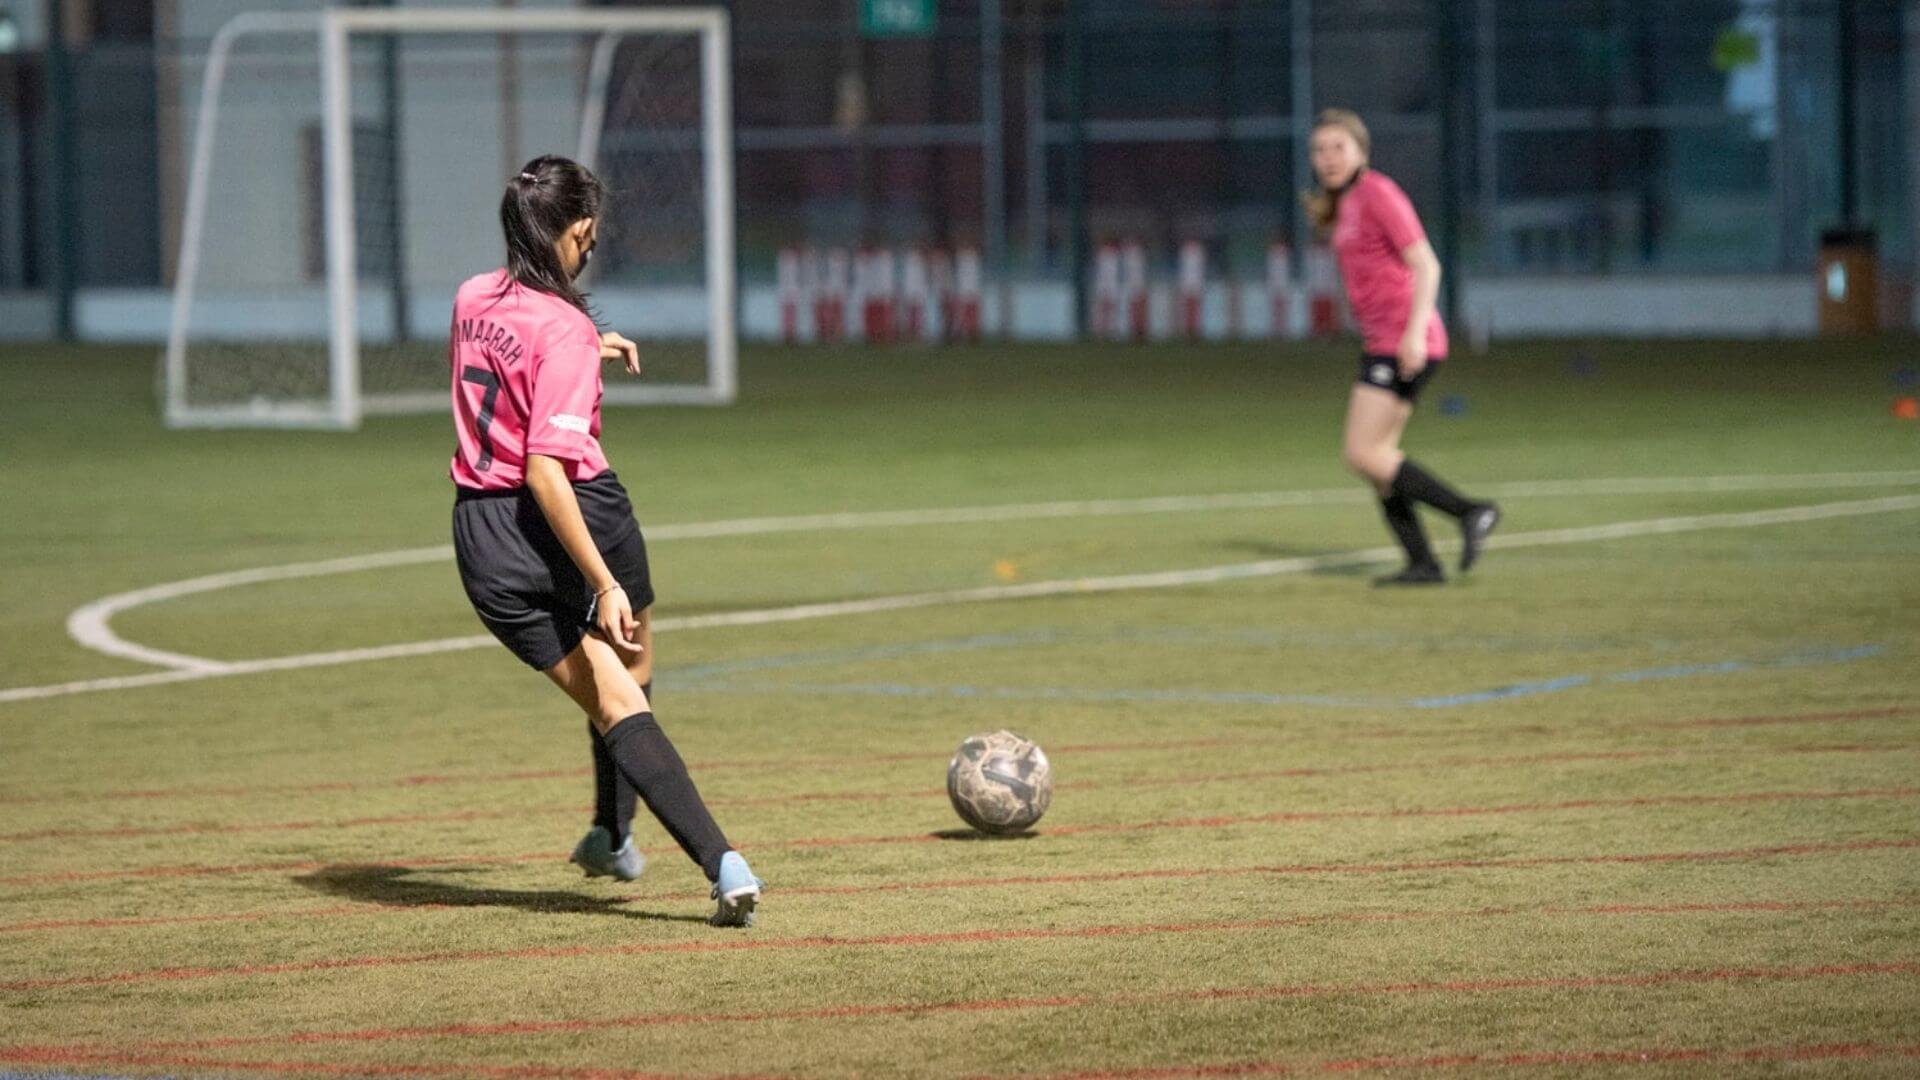 Girls club soccer will continue to look a lot different as the COVID pandemic keeps changing.